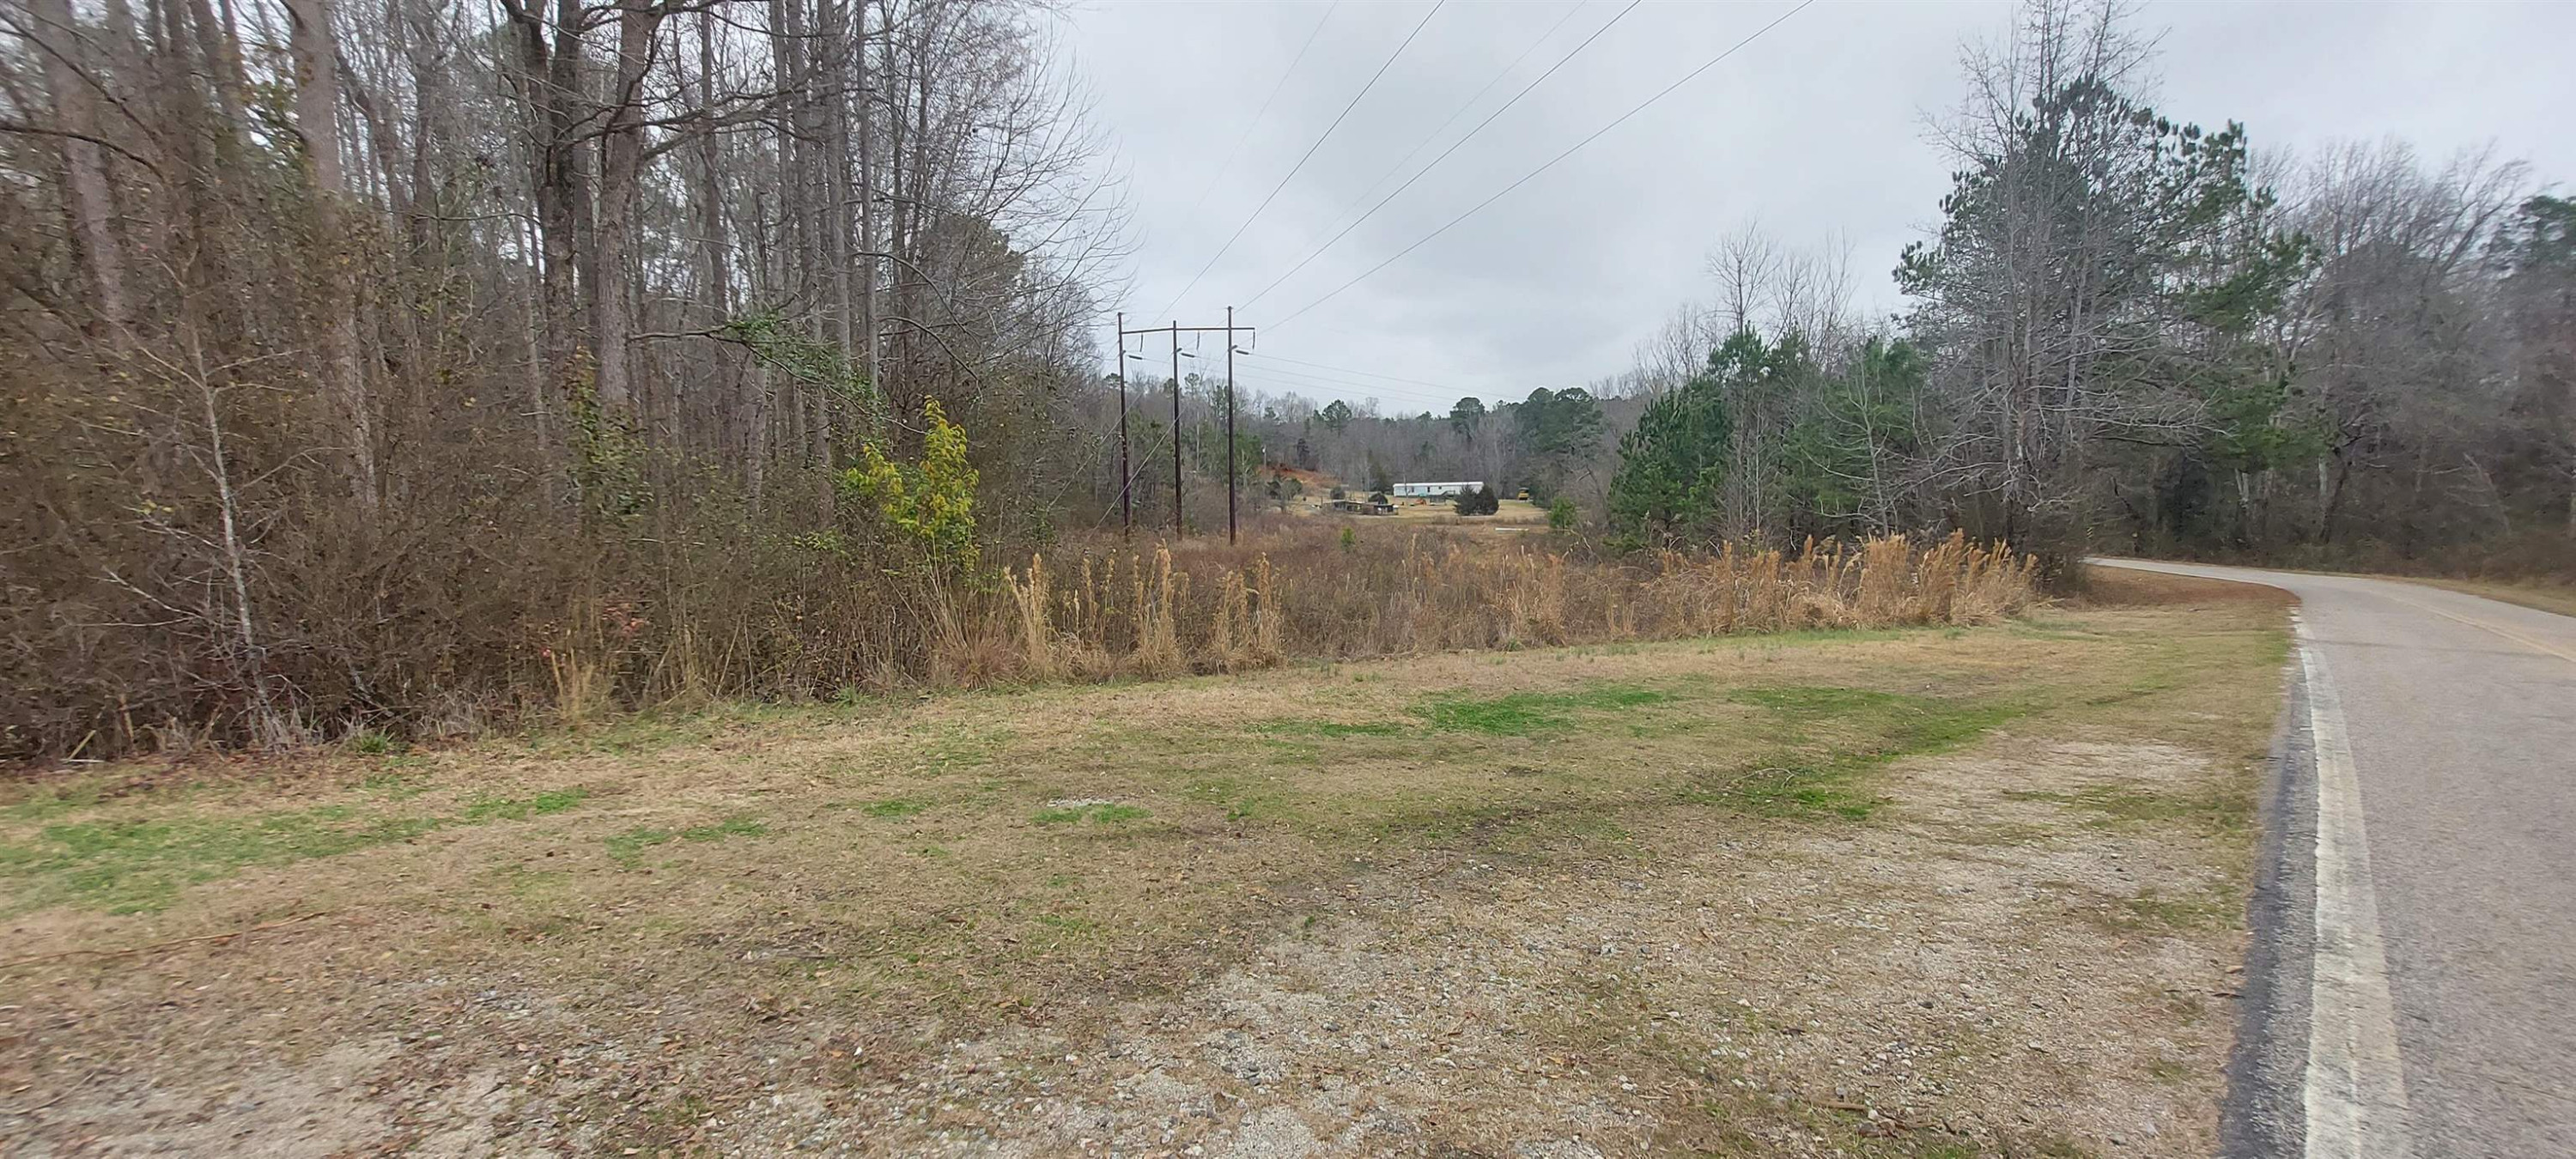 0 Galestown Road Property Photo